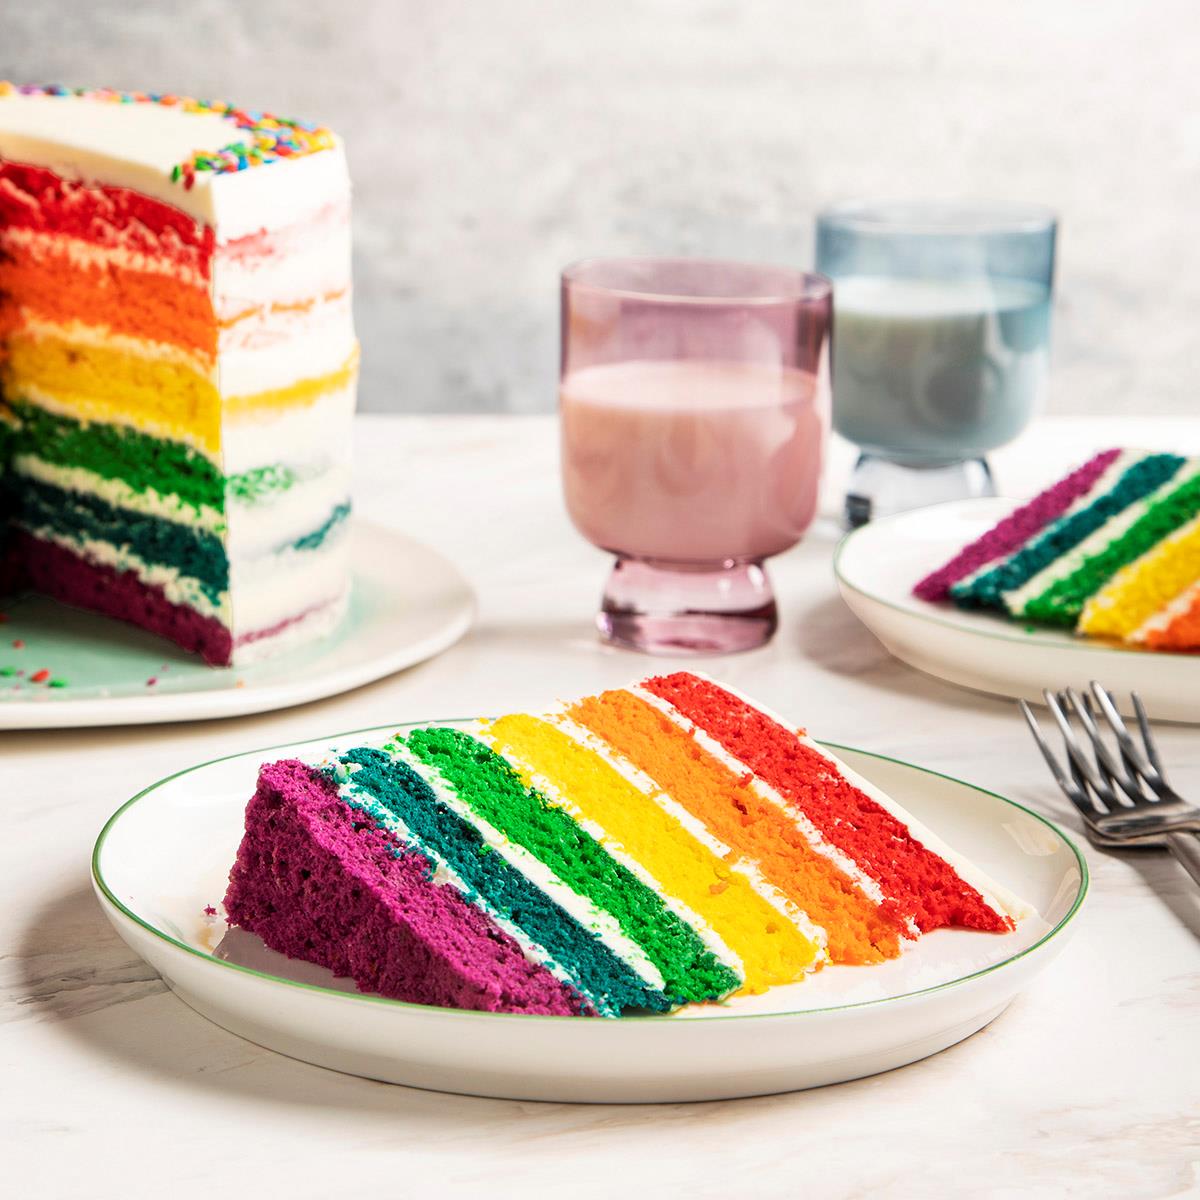 The Rainbow Layer Cake | Delicious Handmade Cakes | Freshness Guaranteed |  Baked Daily by Professional Bakers | For All Occasions | Serves 10 :  Amazon.co.uk: Grocery